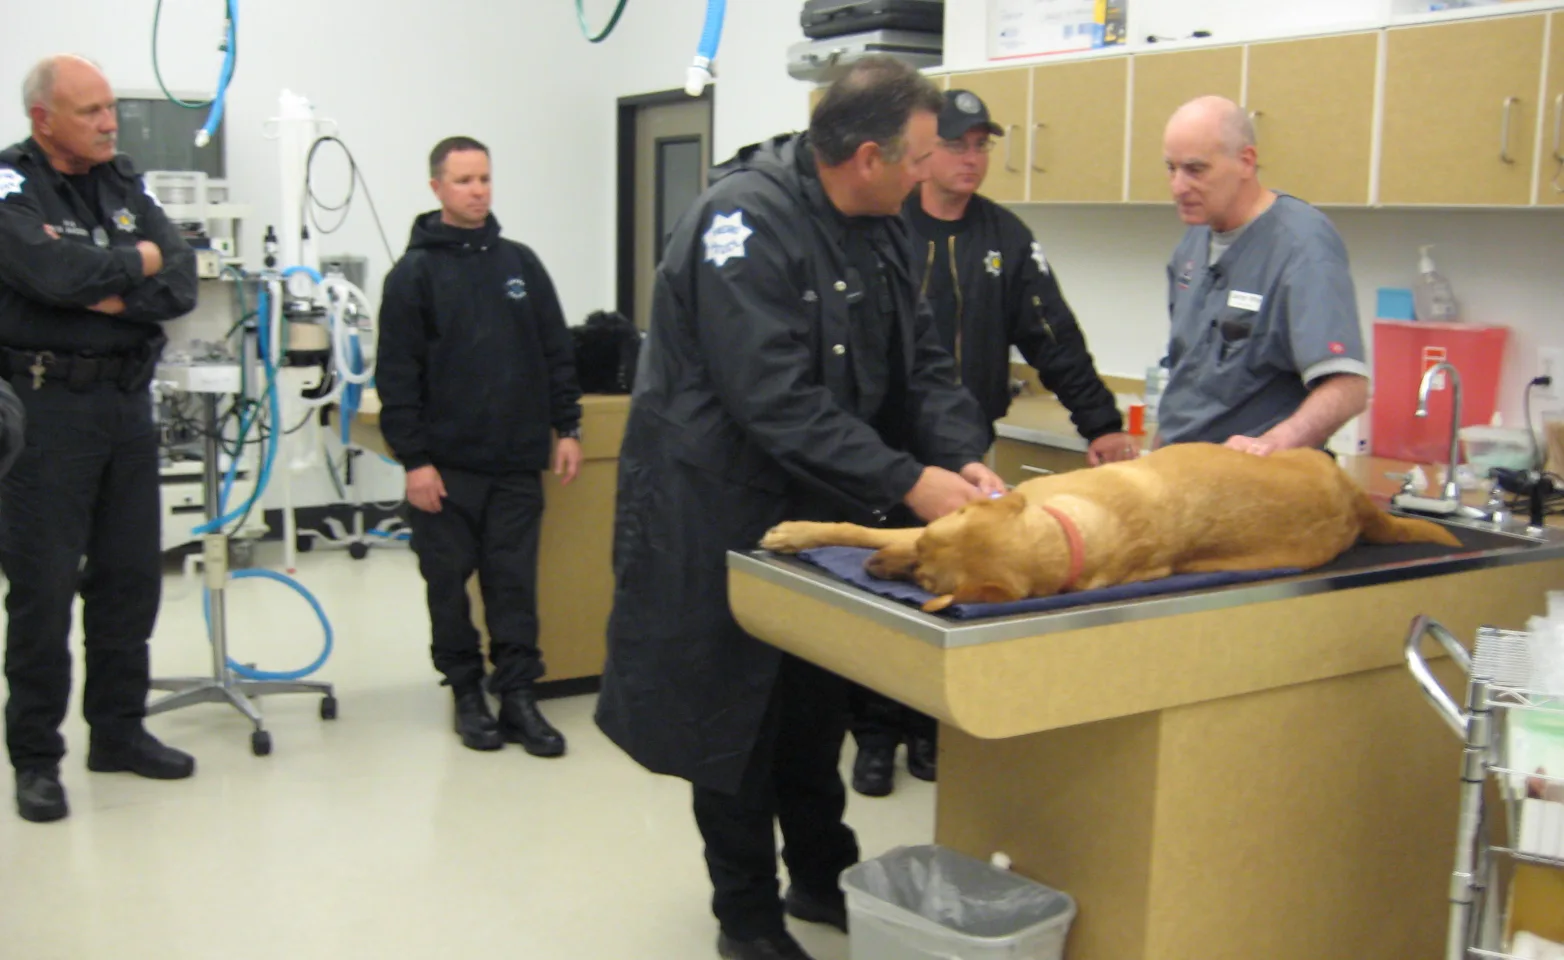 Four first responders and 1 veterinarian stand around an exam table with a dog laying on it.